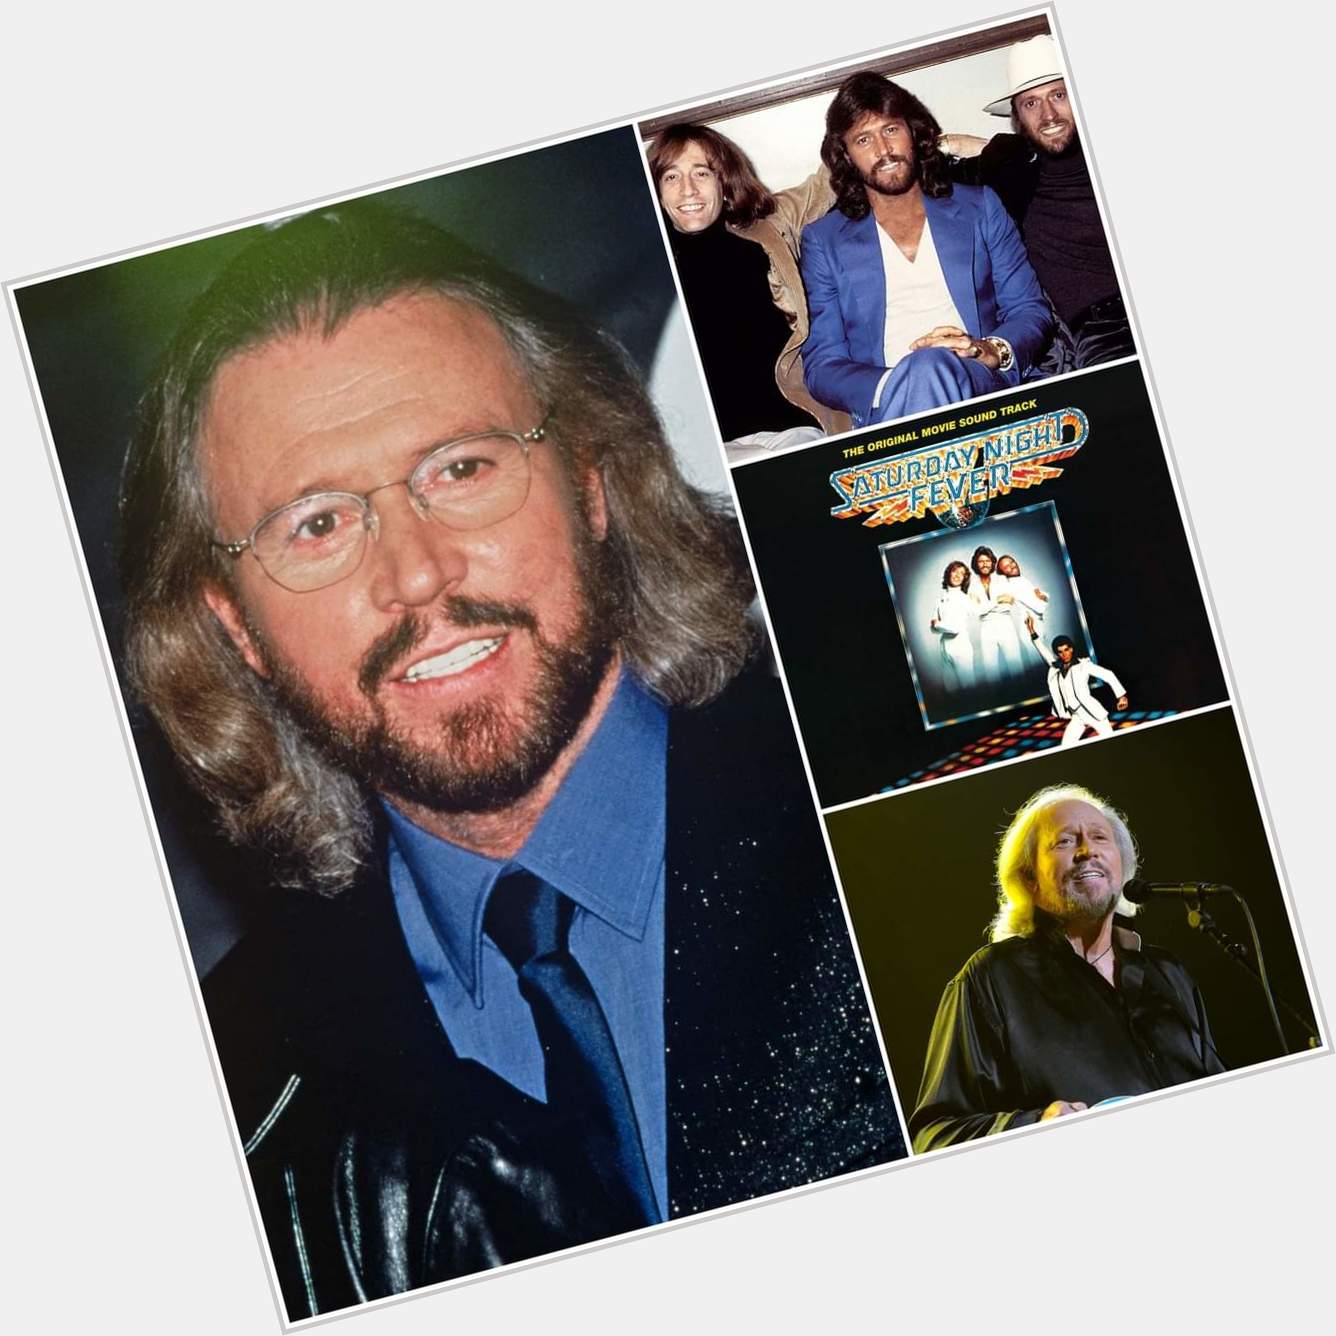 Happy Birthday Barry Gibb !
L\un des trois Bee Gees souffle ses 76 bougies  